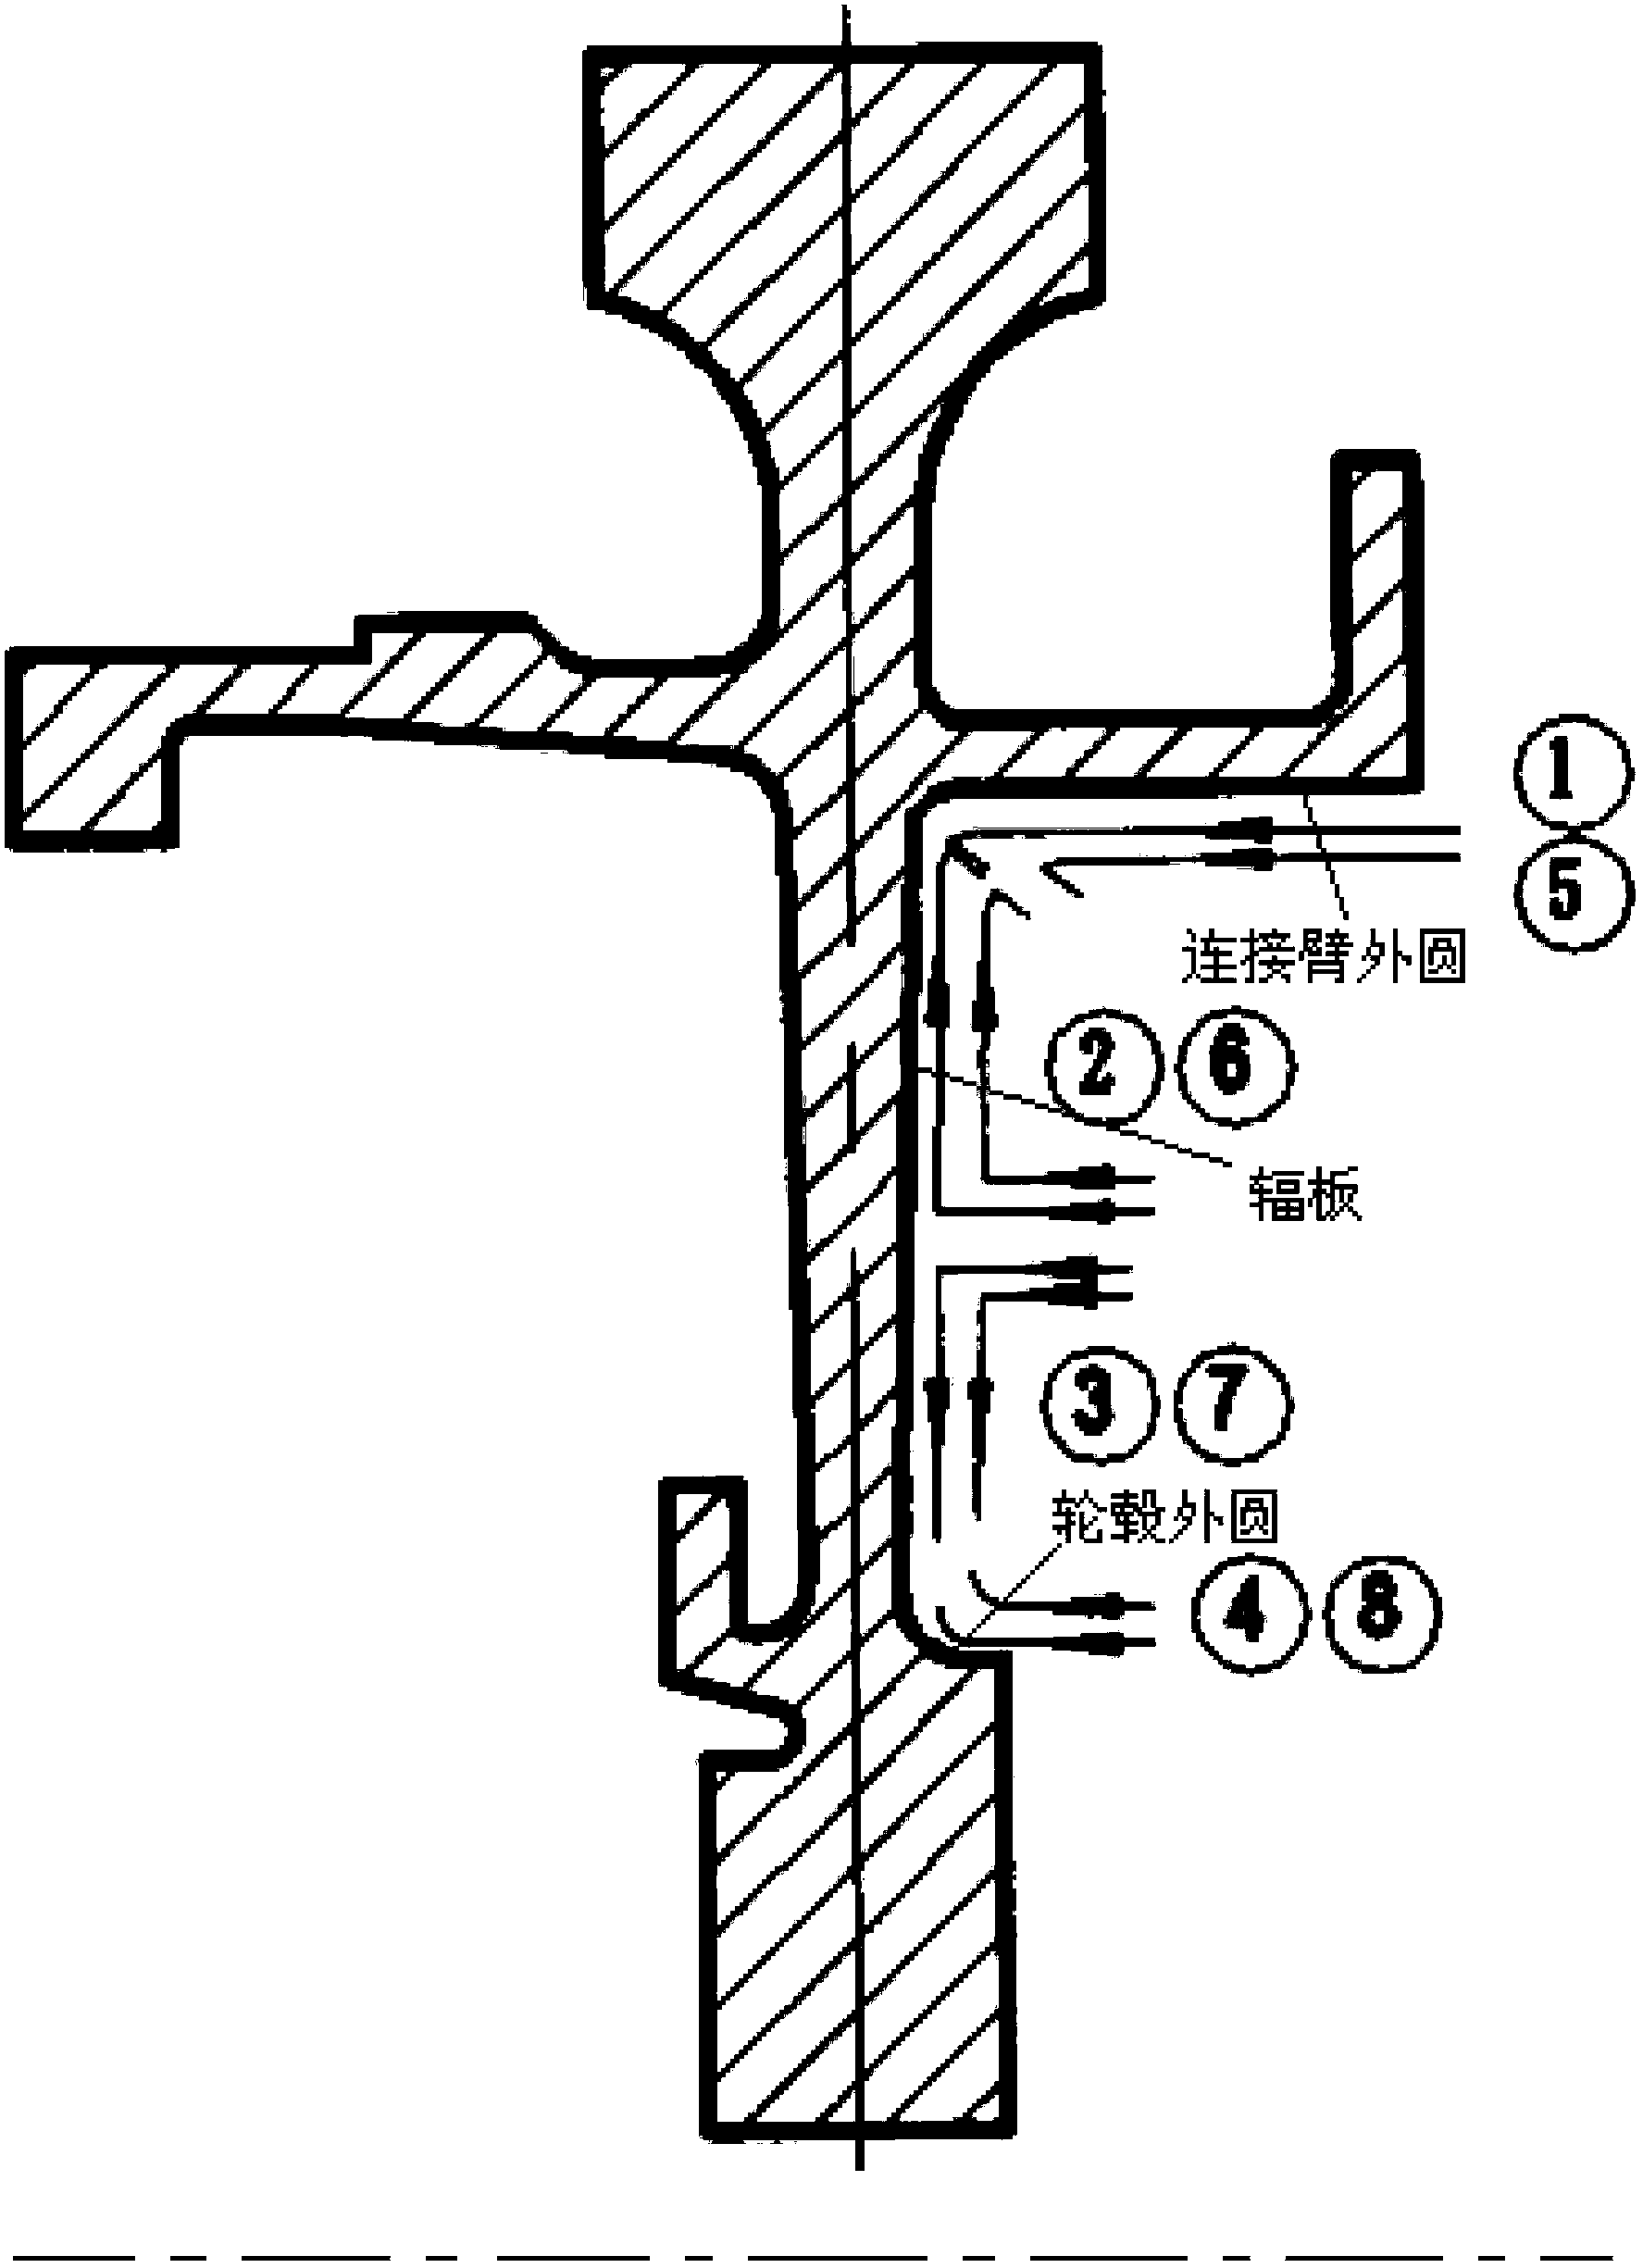 Cutting and feeding path planning method applied to mechanical machining of metal components